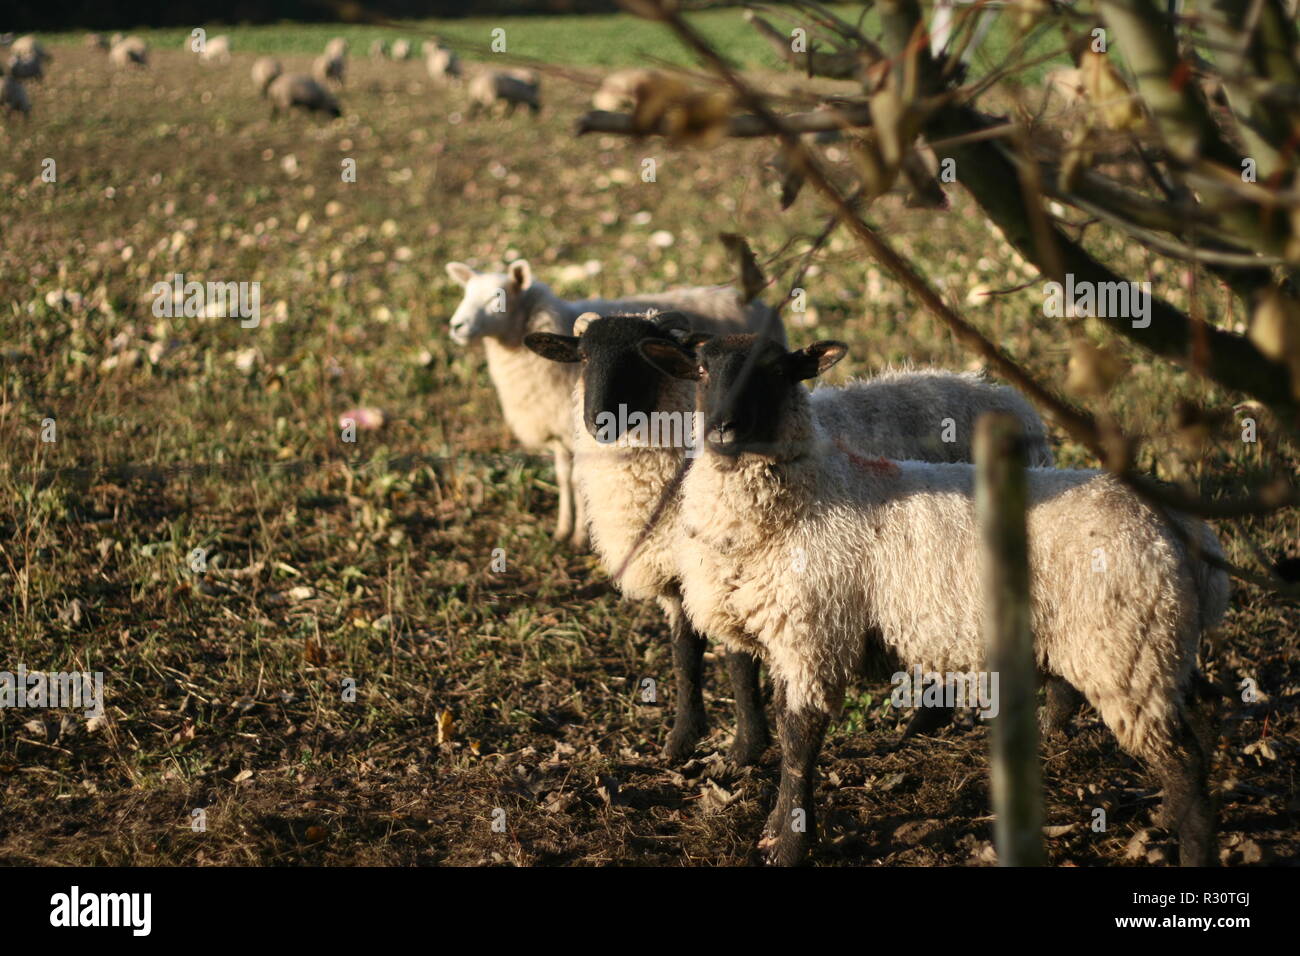 A picture of 2 sheep looking at the screen Stock Photo